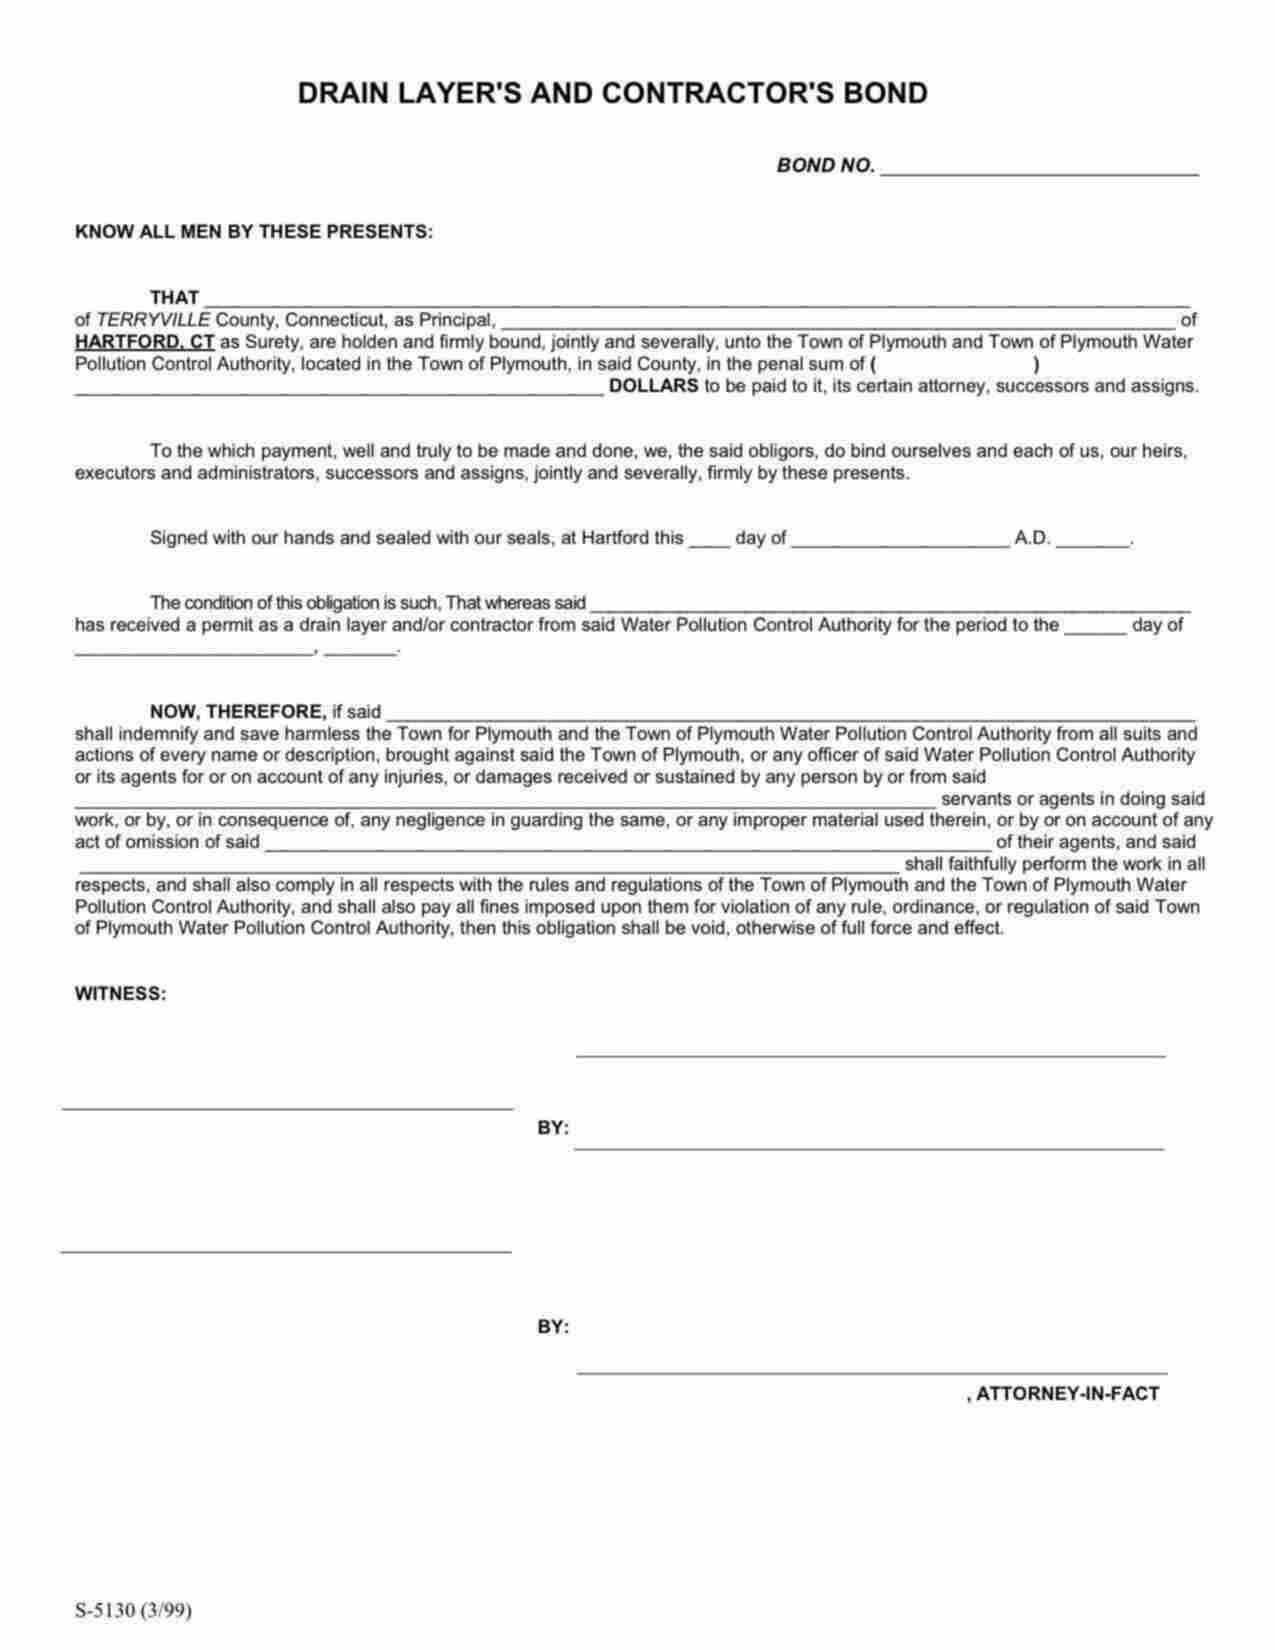 Connecticut Drain Layer and Contractor Bond Form